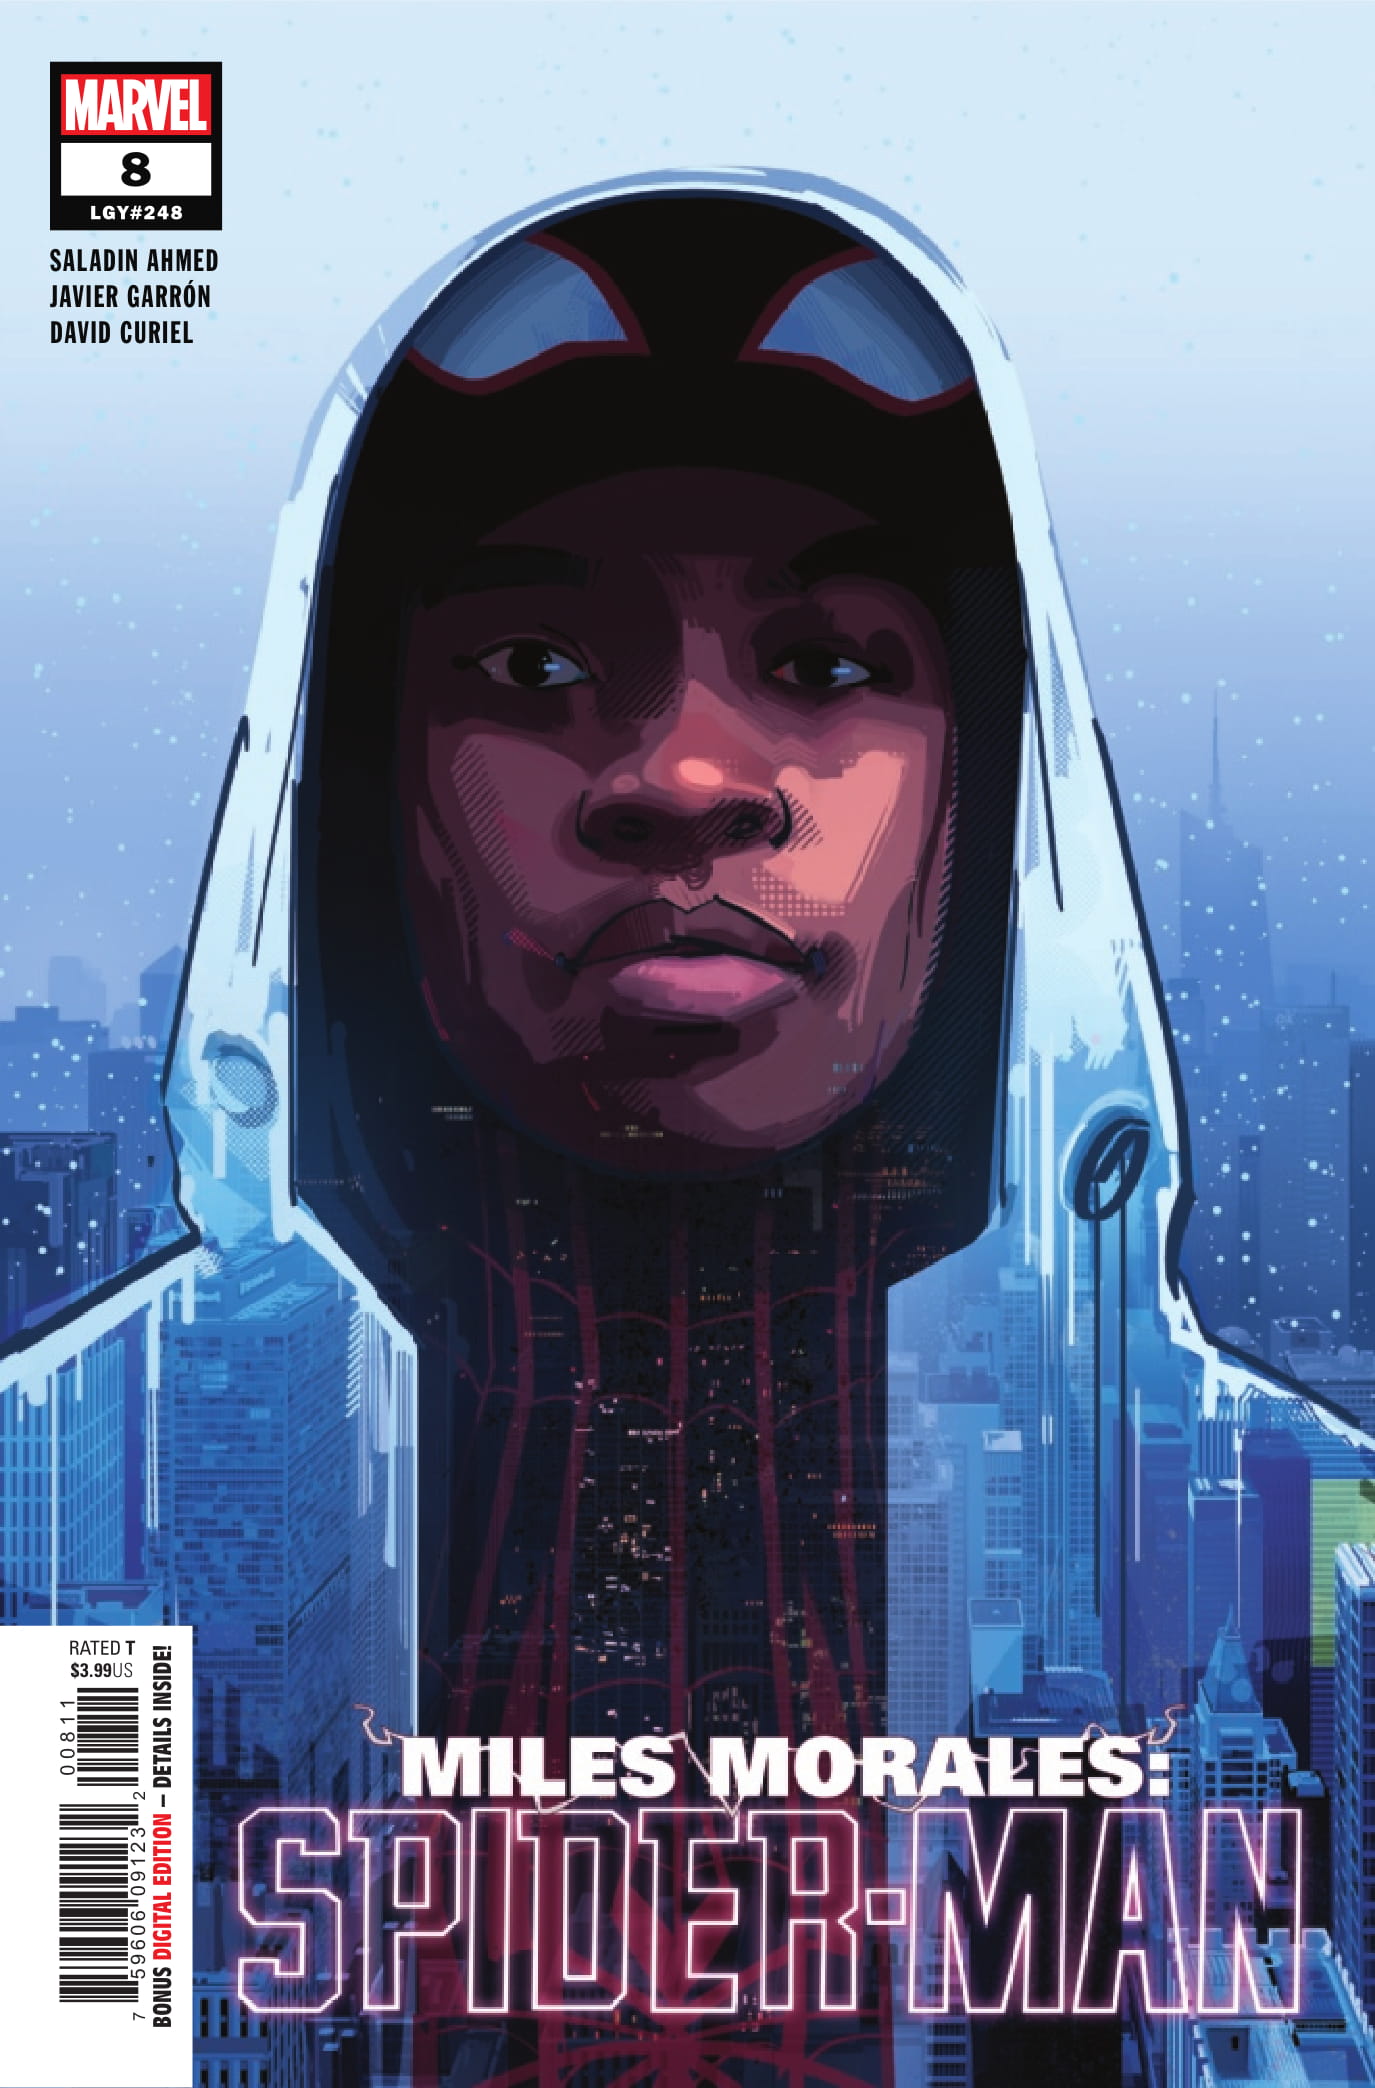 Miles Morales: Spider-Man #8 cover art by Patrick O'Keefe